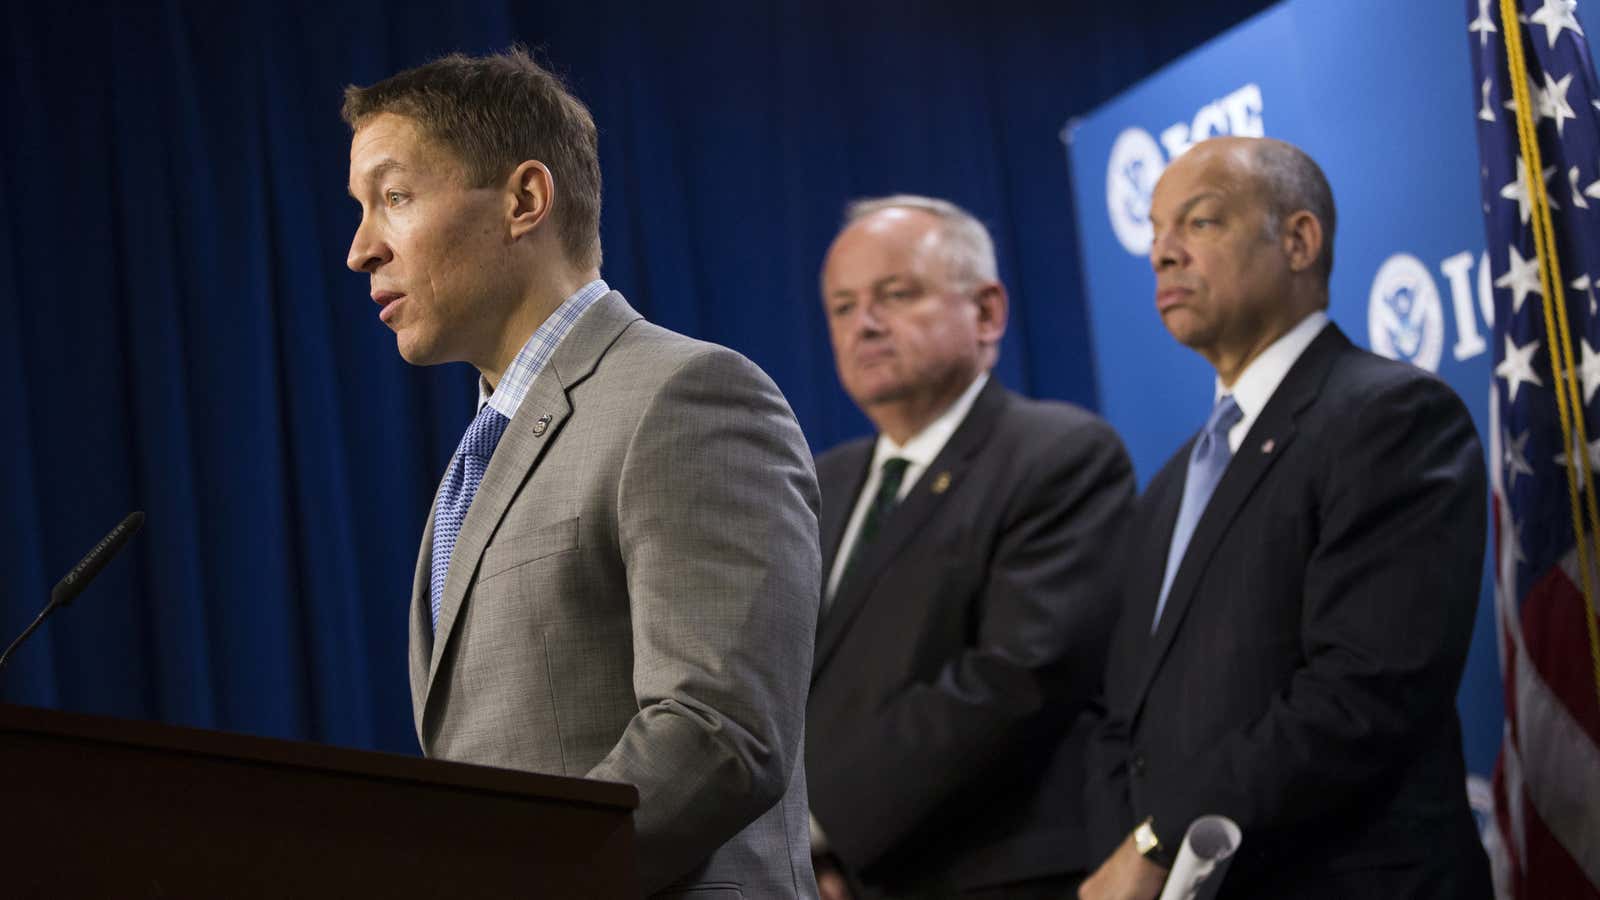 Daniel Ragsdale, left, speaks at a 2014 news conference at the ICE headquarters